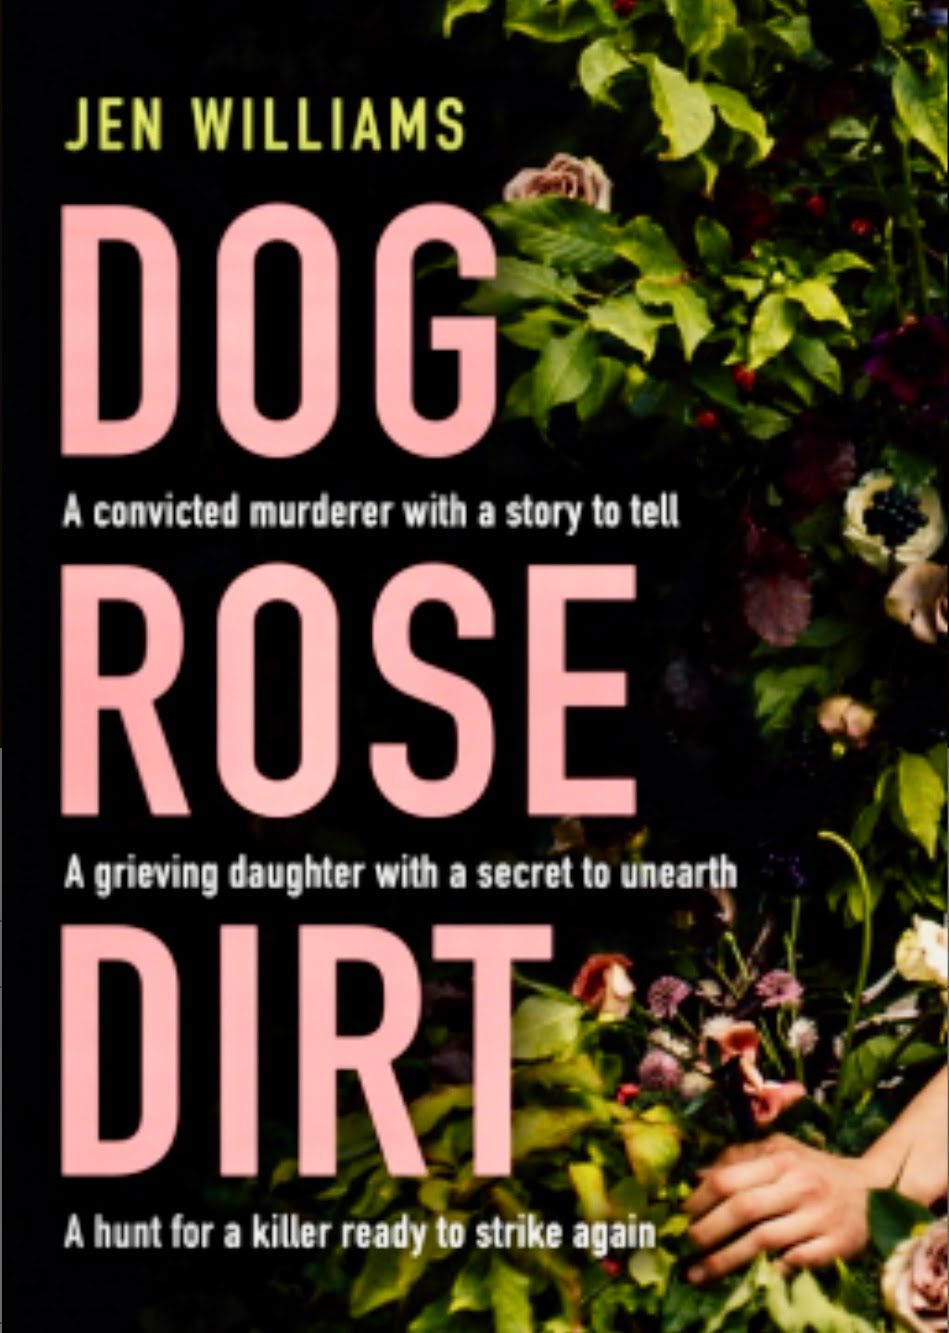 DOG ROSE DIRT BY  JEN WILLIAMS – BOOK REVIEW